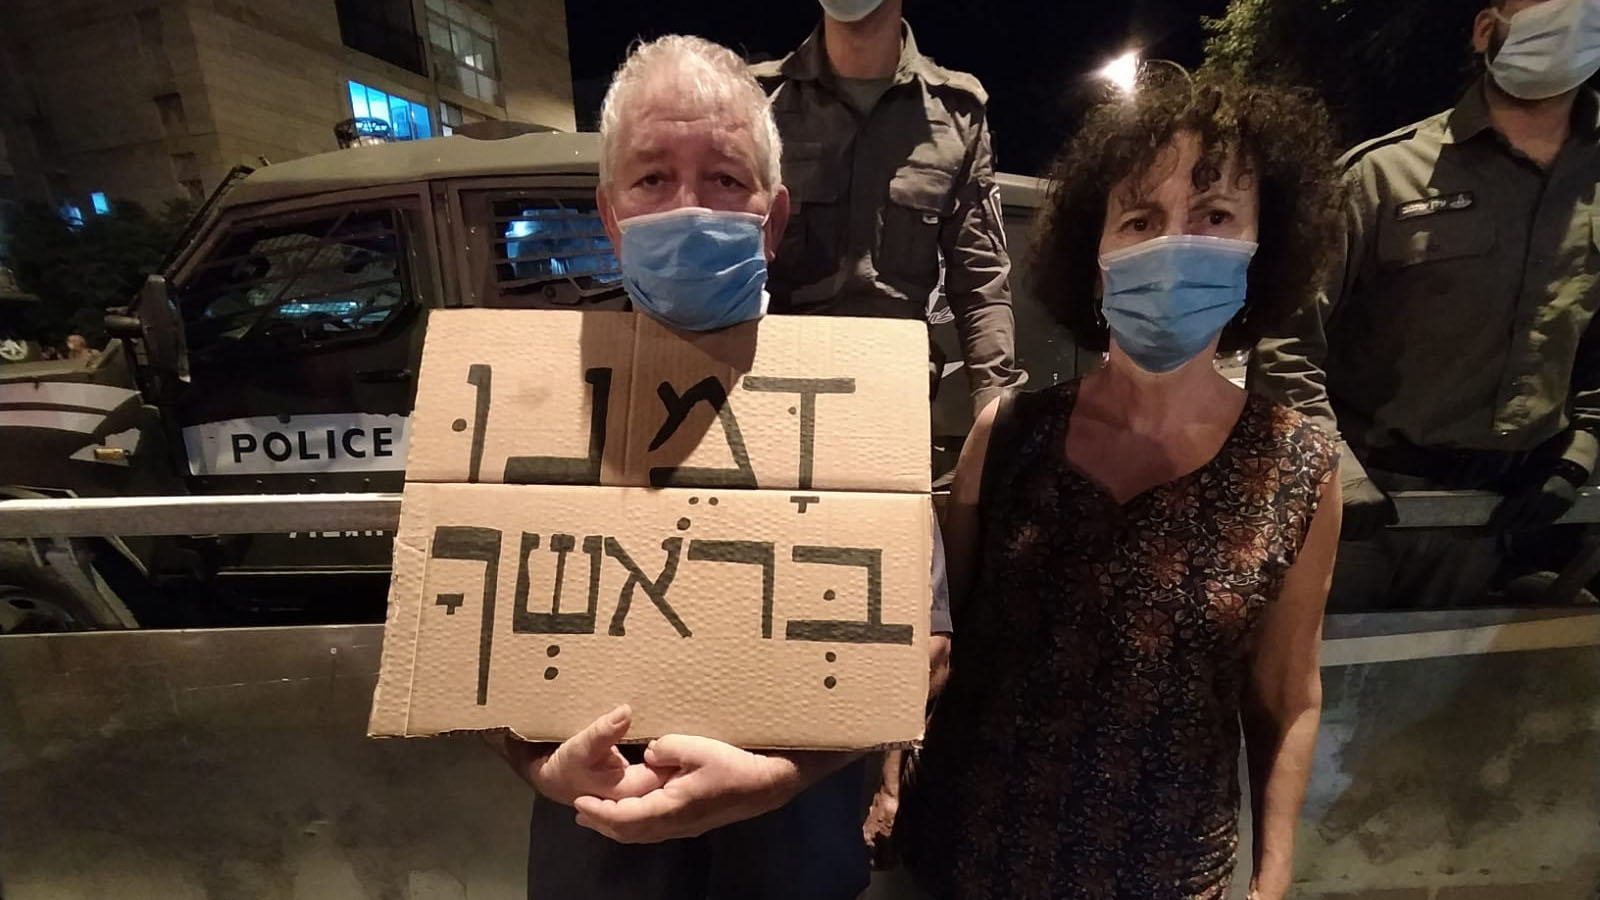 Nurit and Gil, 65 and 67, from Mevaseret Zion, came with a warning. (Photo: Yahel Faraj)